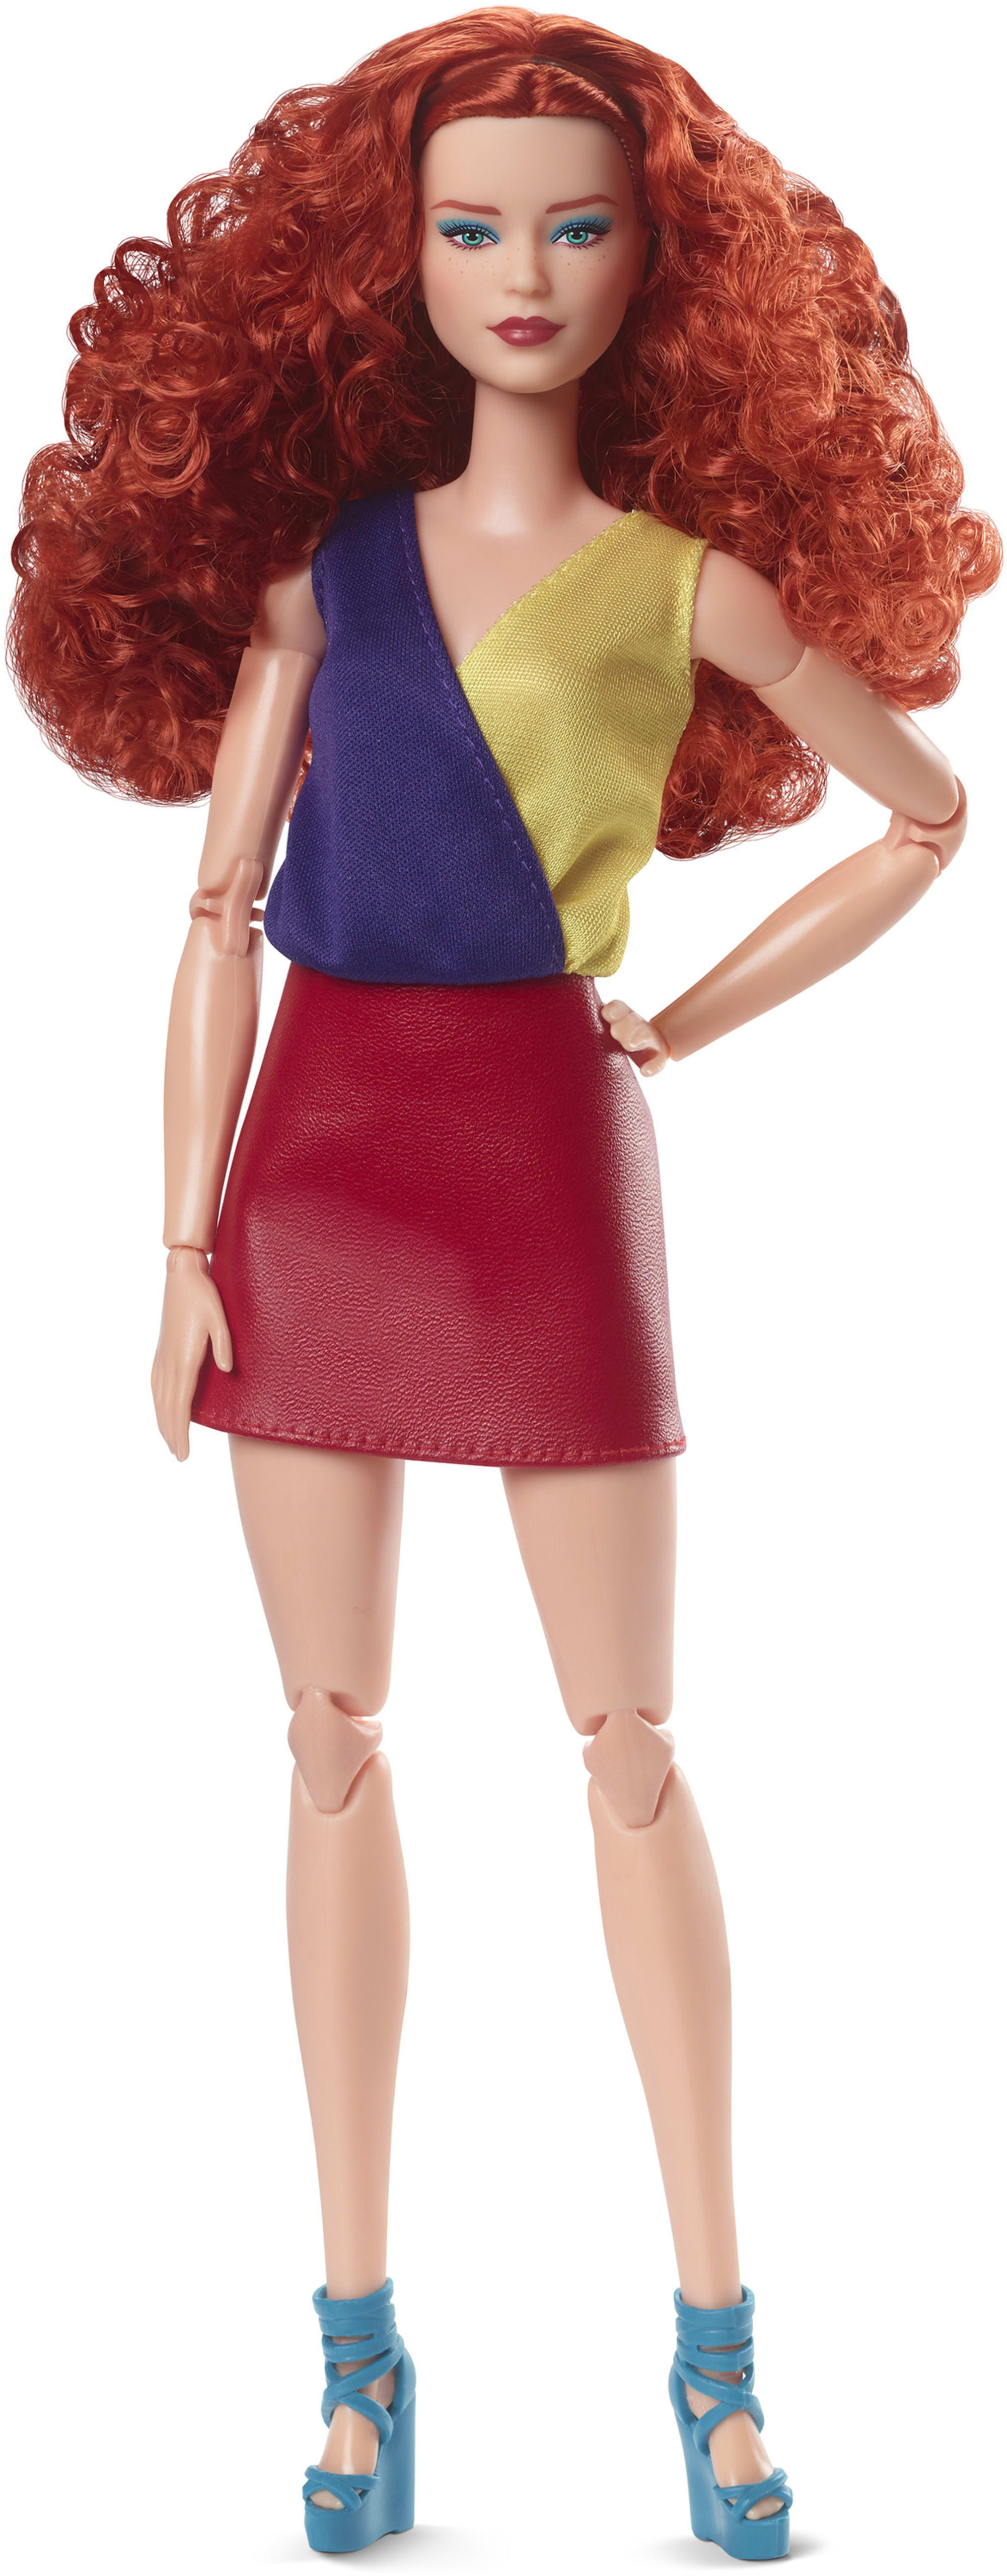 Barbie Looks Doll | Redhead with Color Block Outfit | MATTEL